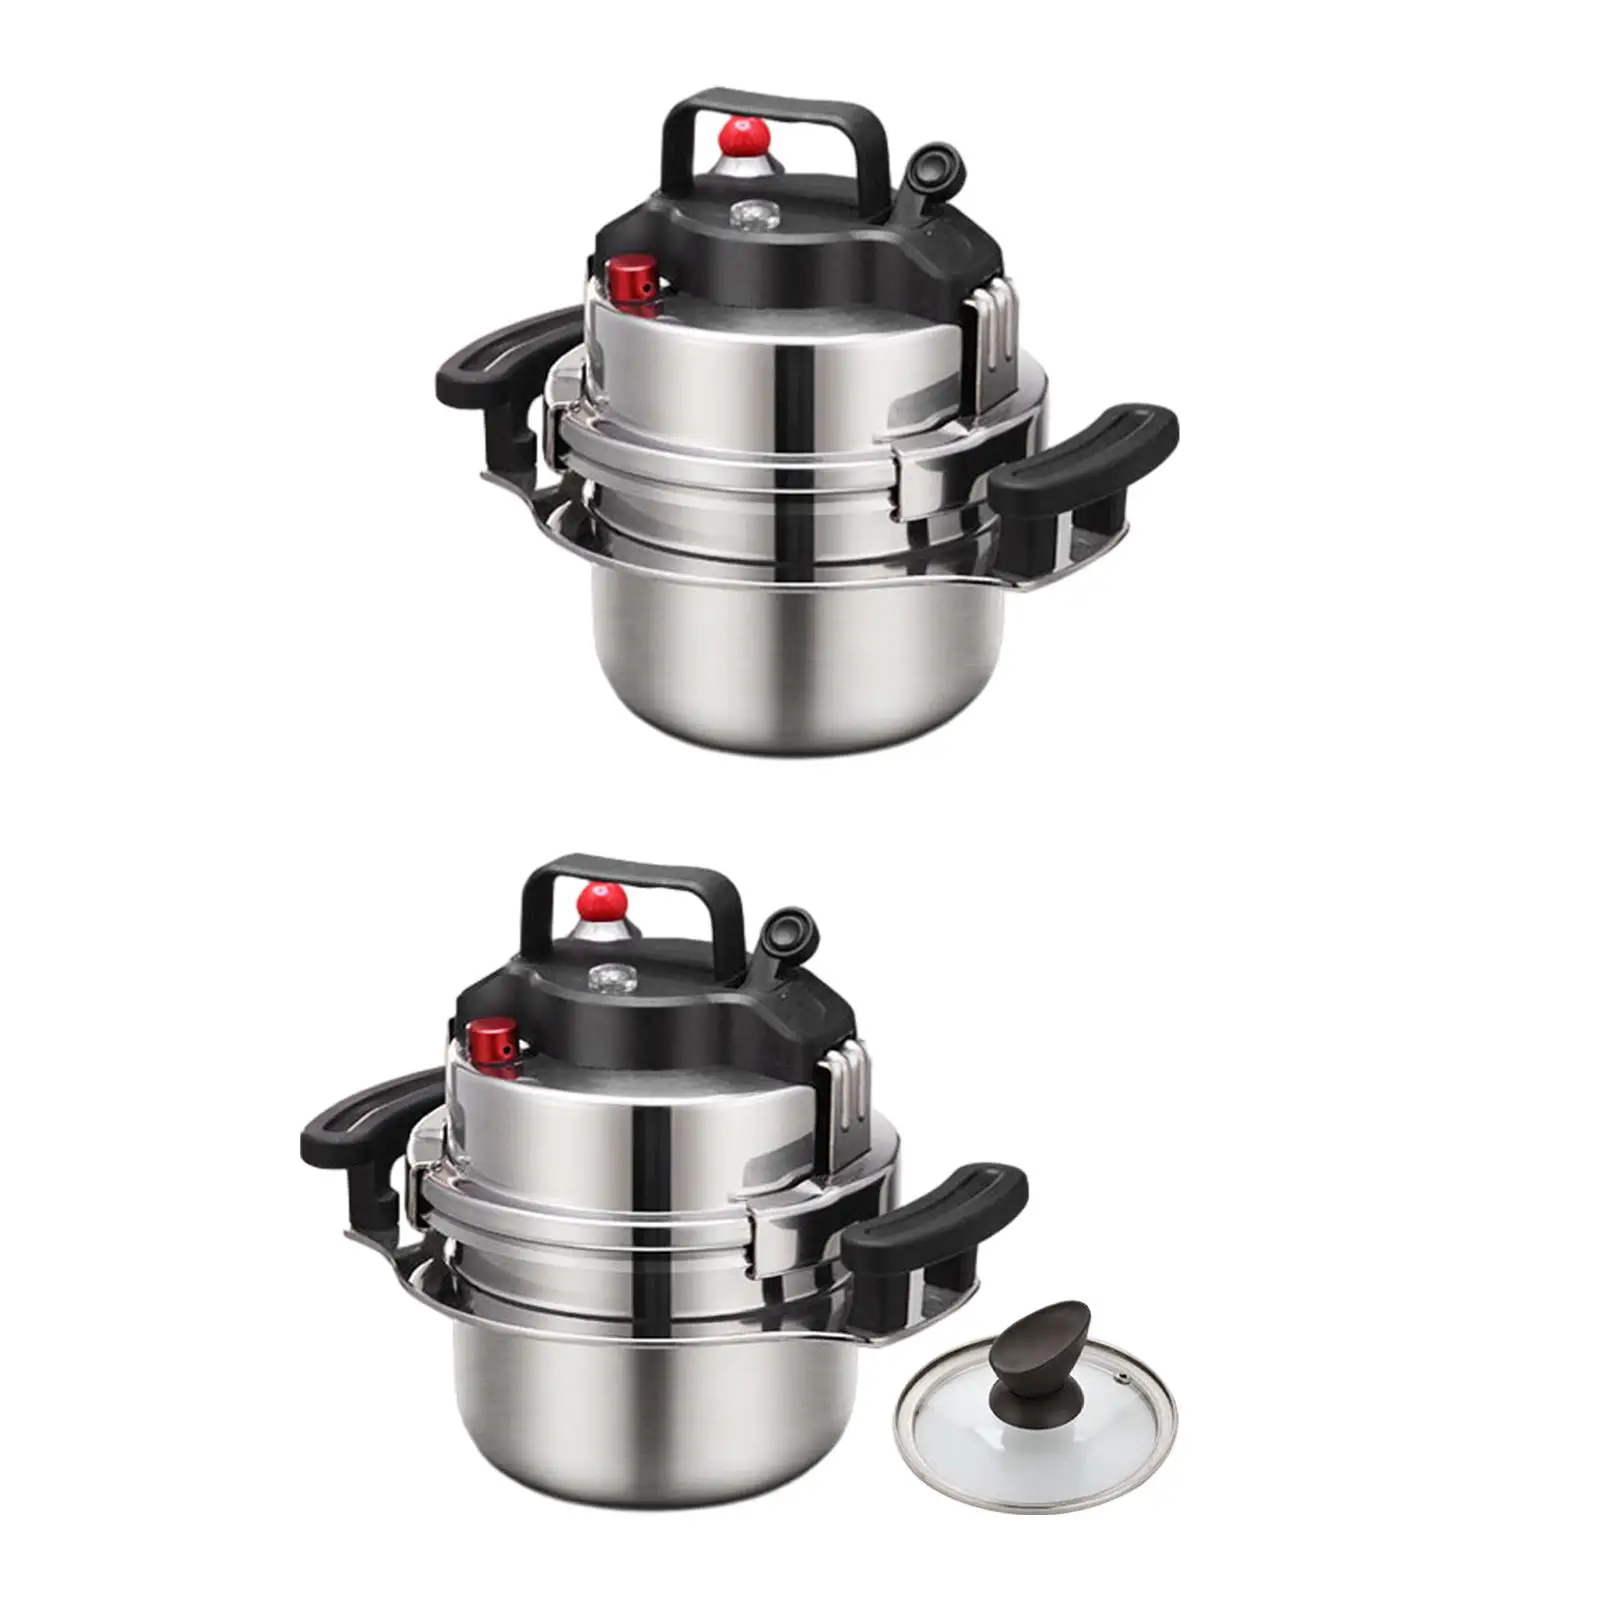 2L Stainless Steel Pressure Cooker Kitchen Cooking Pot Cookware Fast